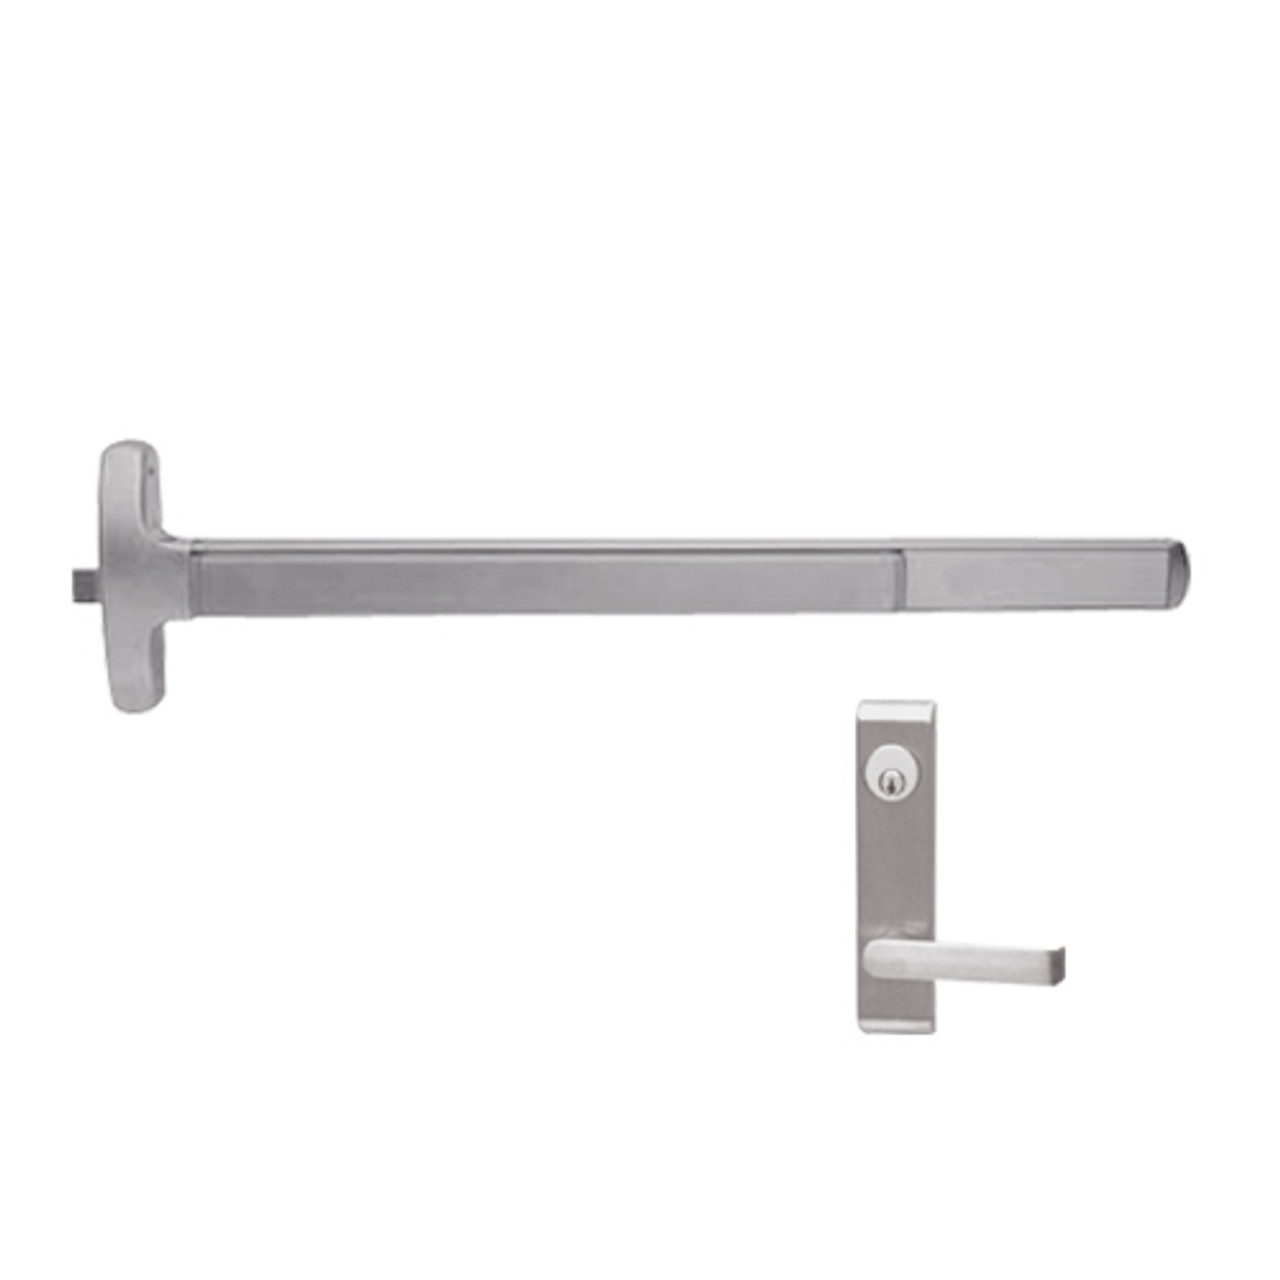 F-24-R-L-NL-DANE-US32D-3-LHR Falcon Exit Device in Satin Stainless Steel